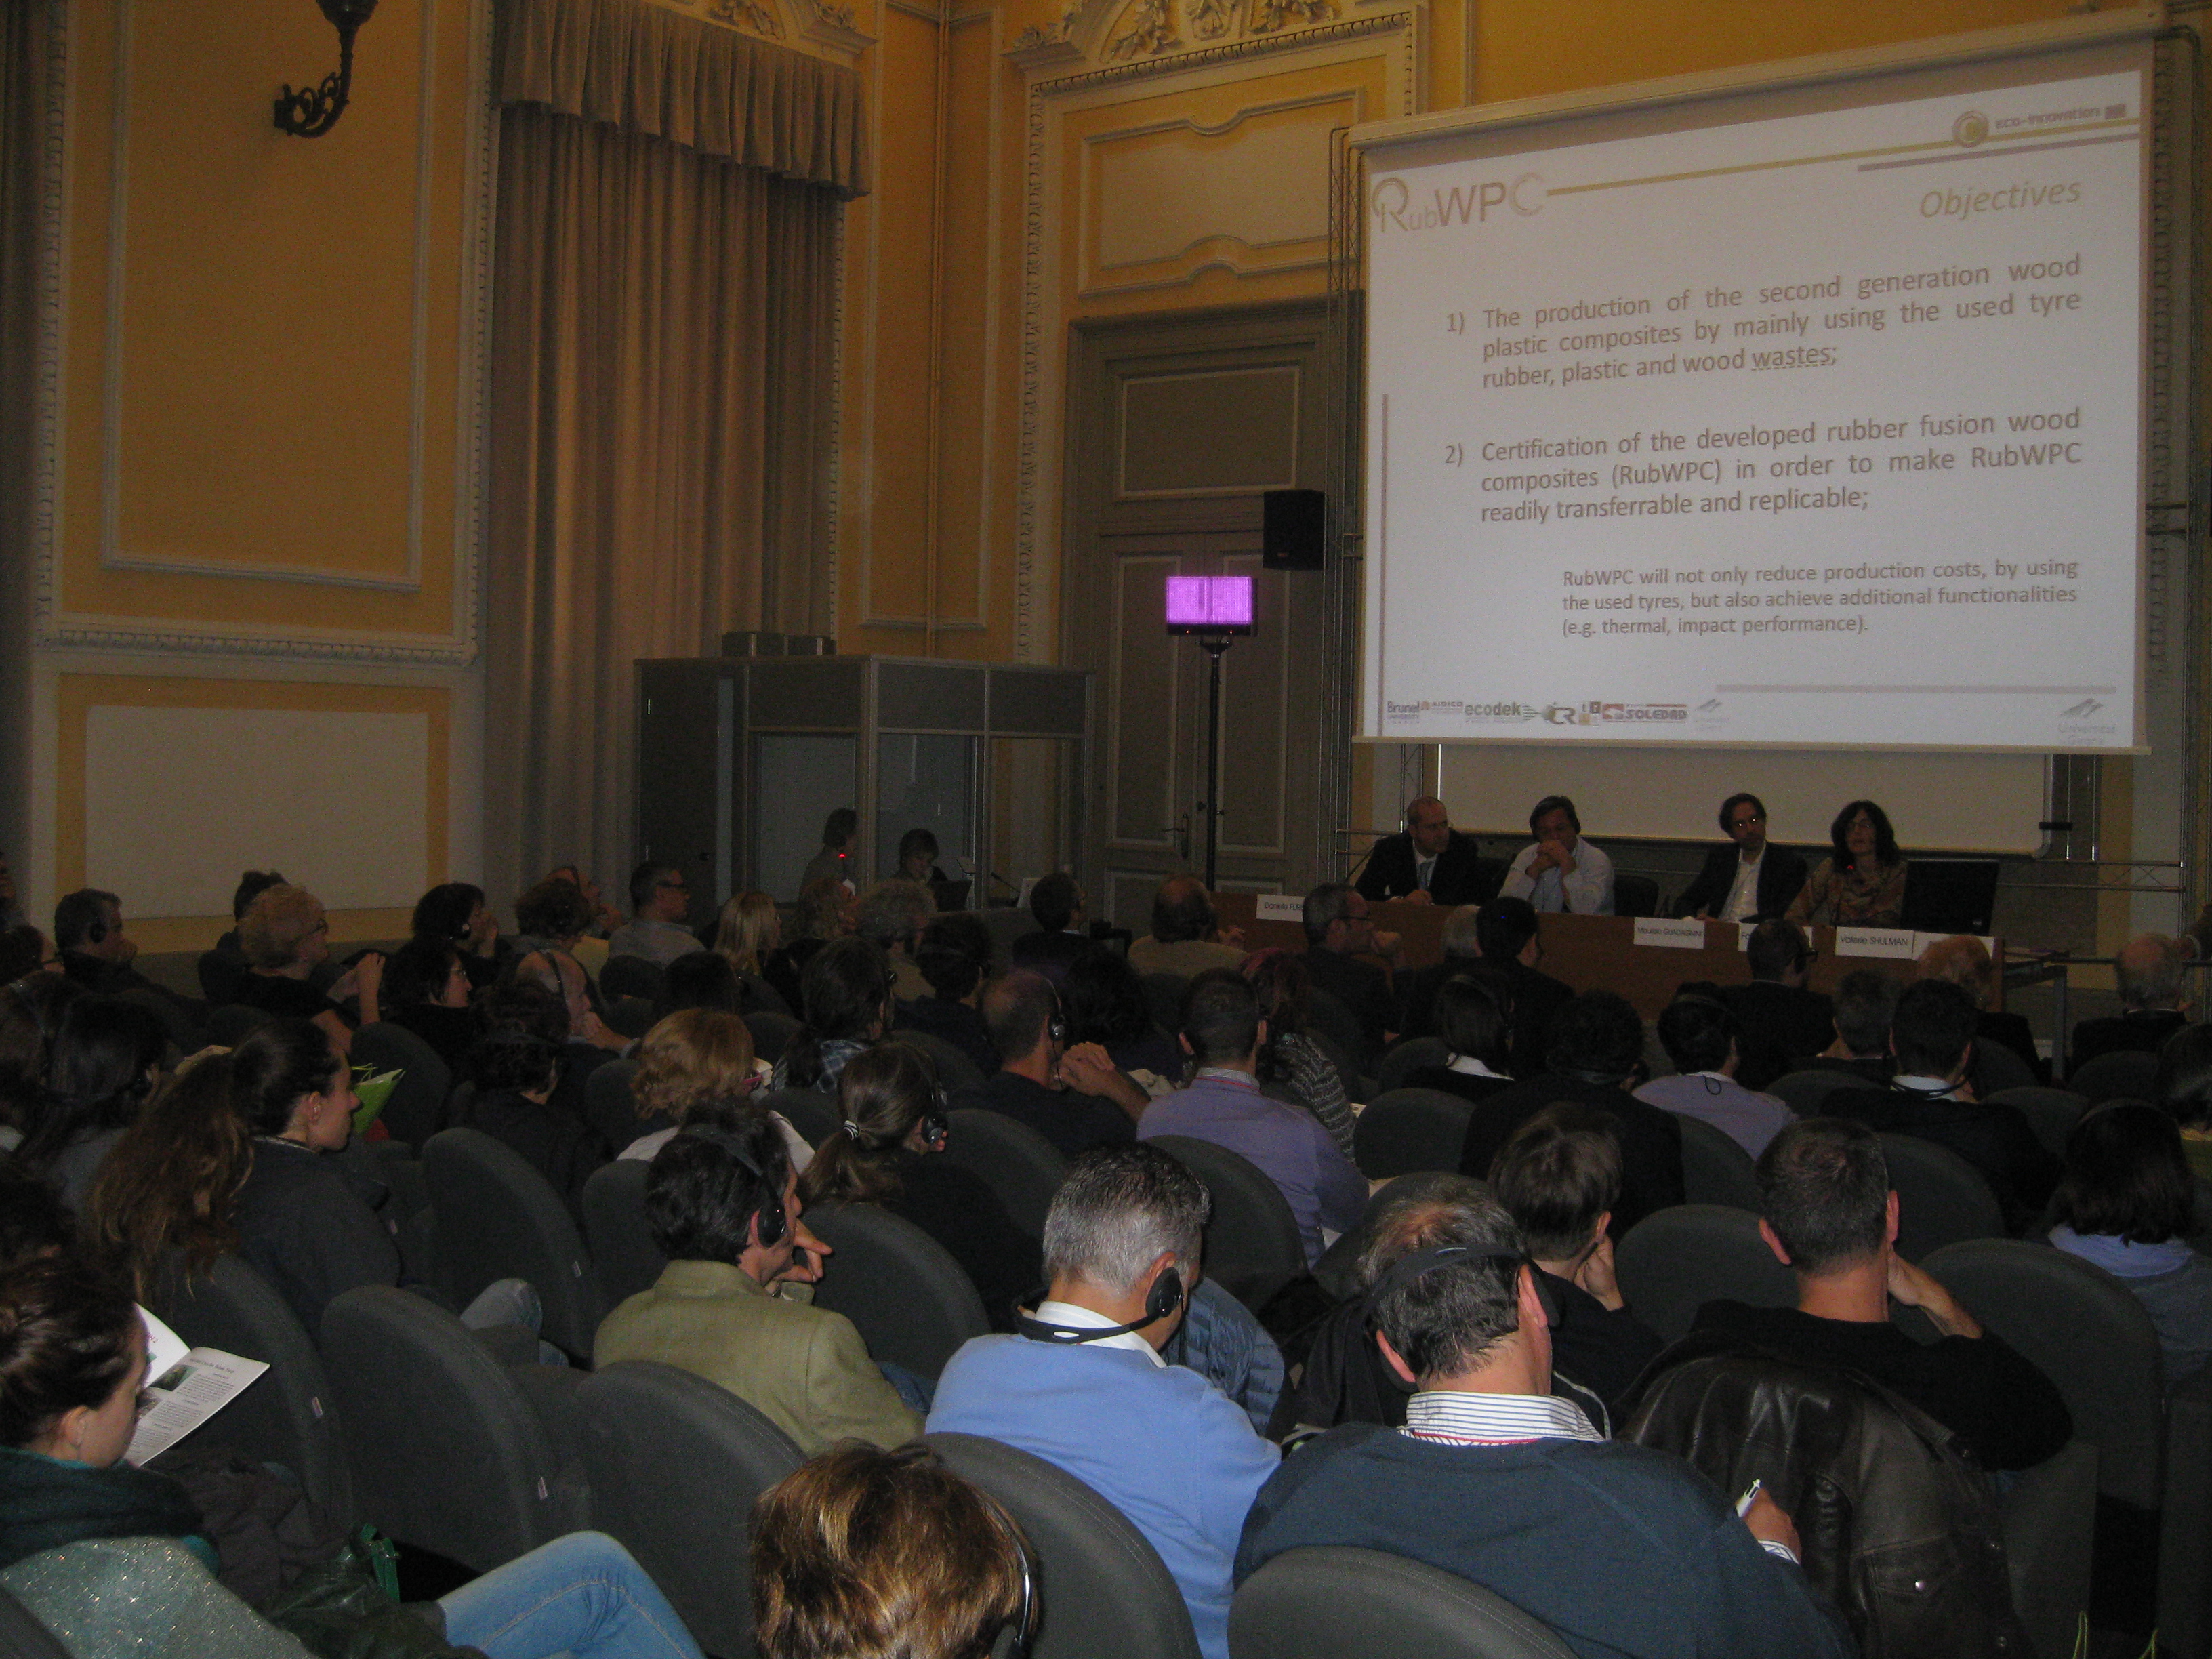 RubWPC @ International Seminar for Safer and more Sustainable City Life in Turin